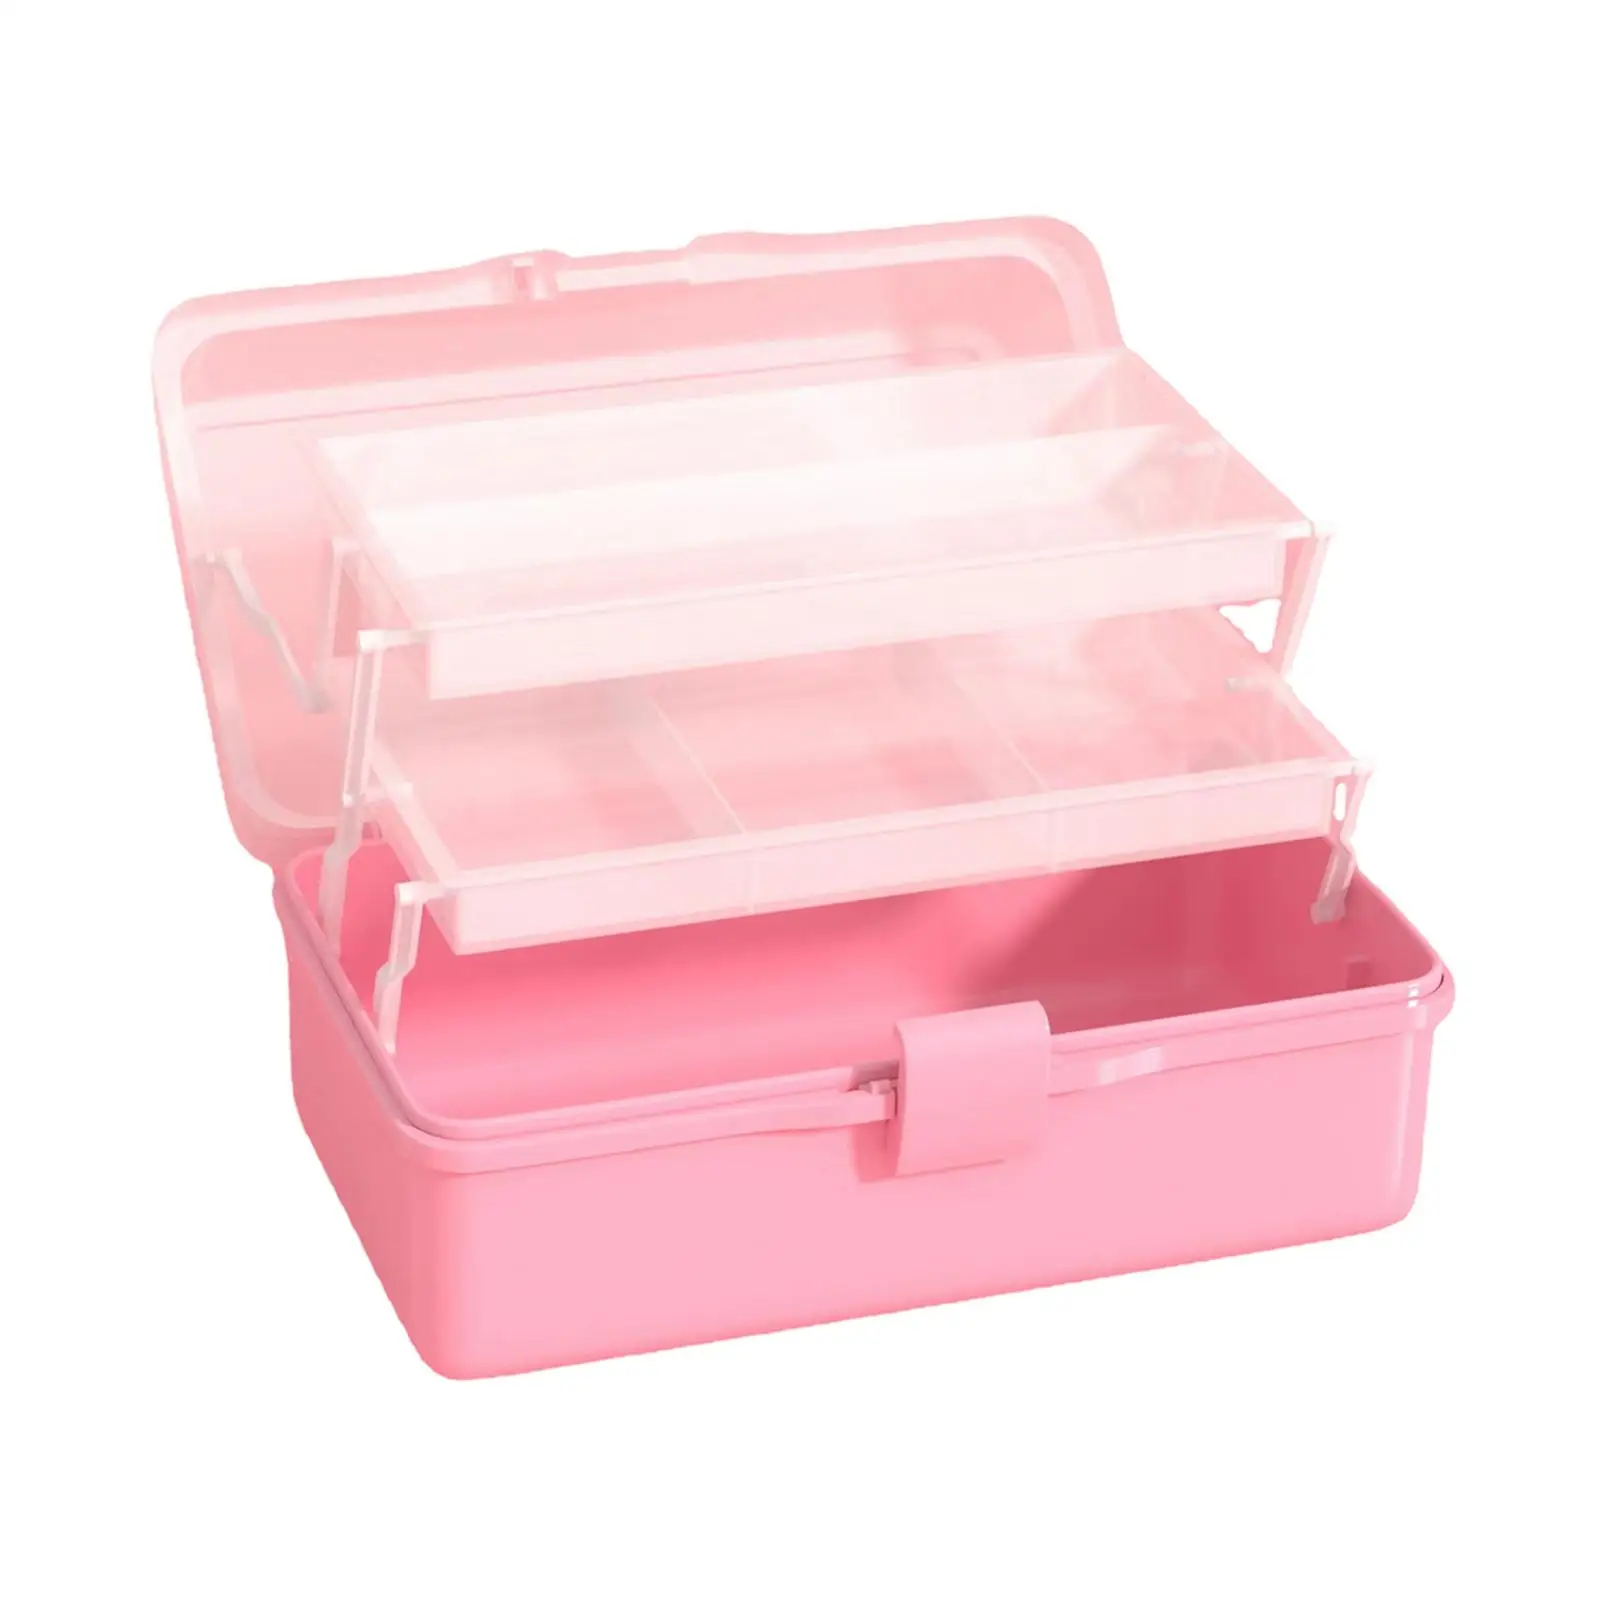 Portable Storage Box Tool Storage Box Sewing Box Organizer with Handle Folding for Cosmetic